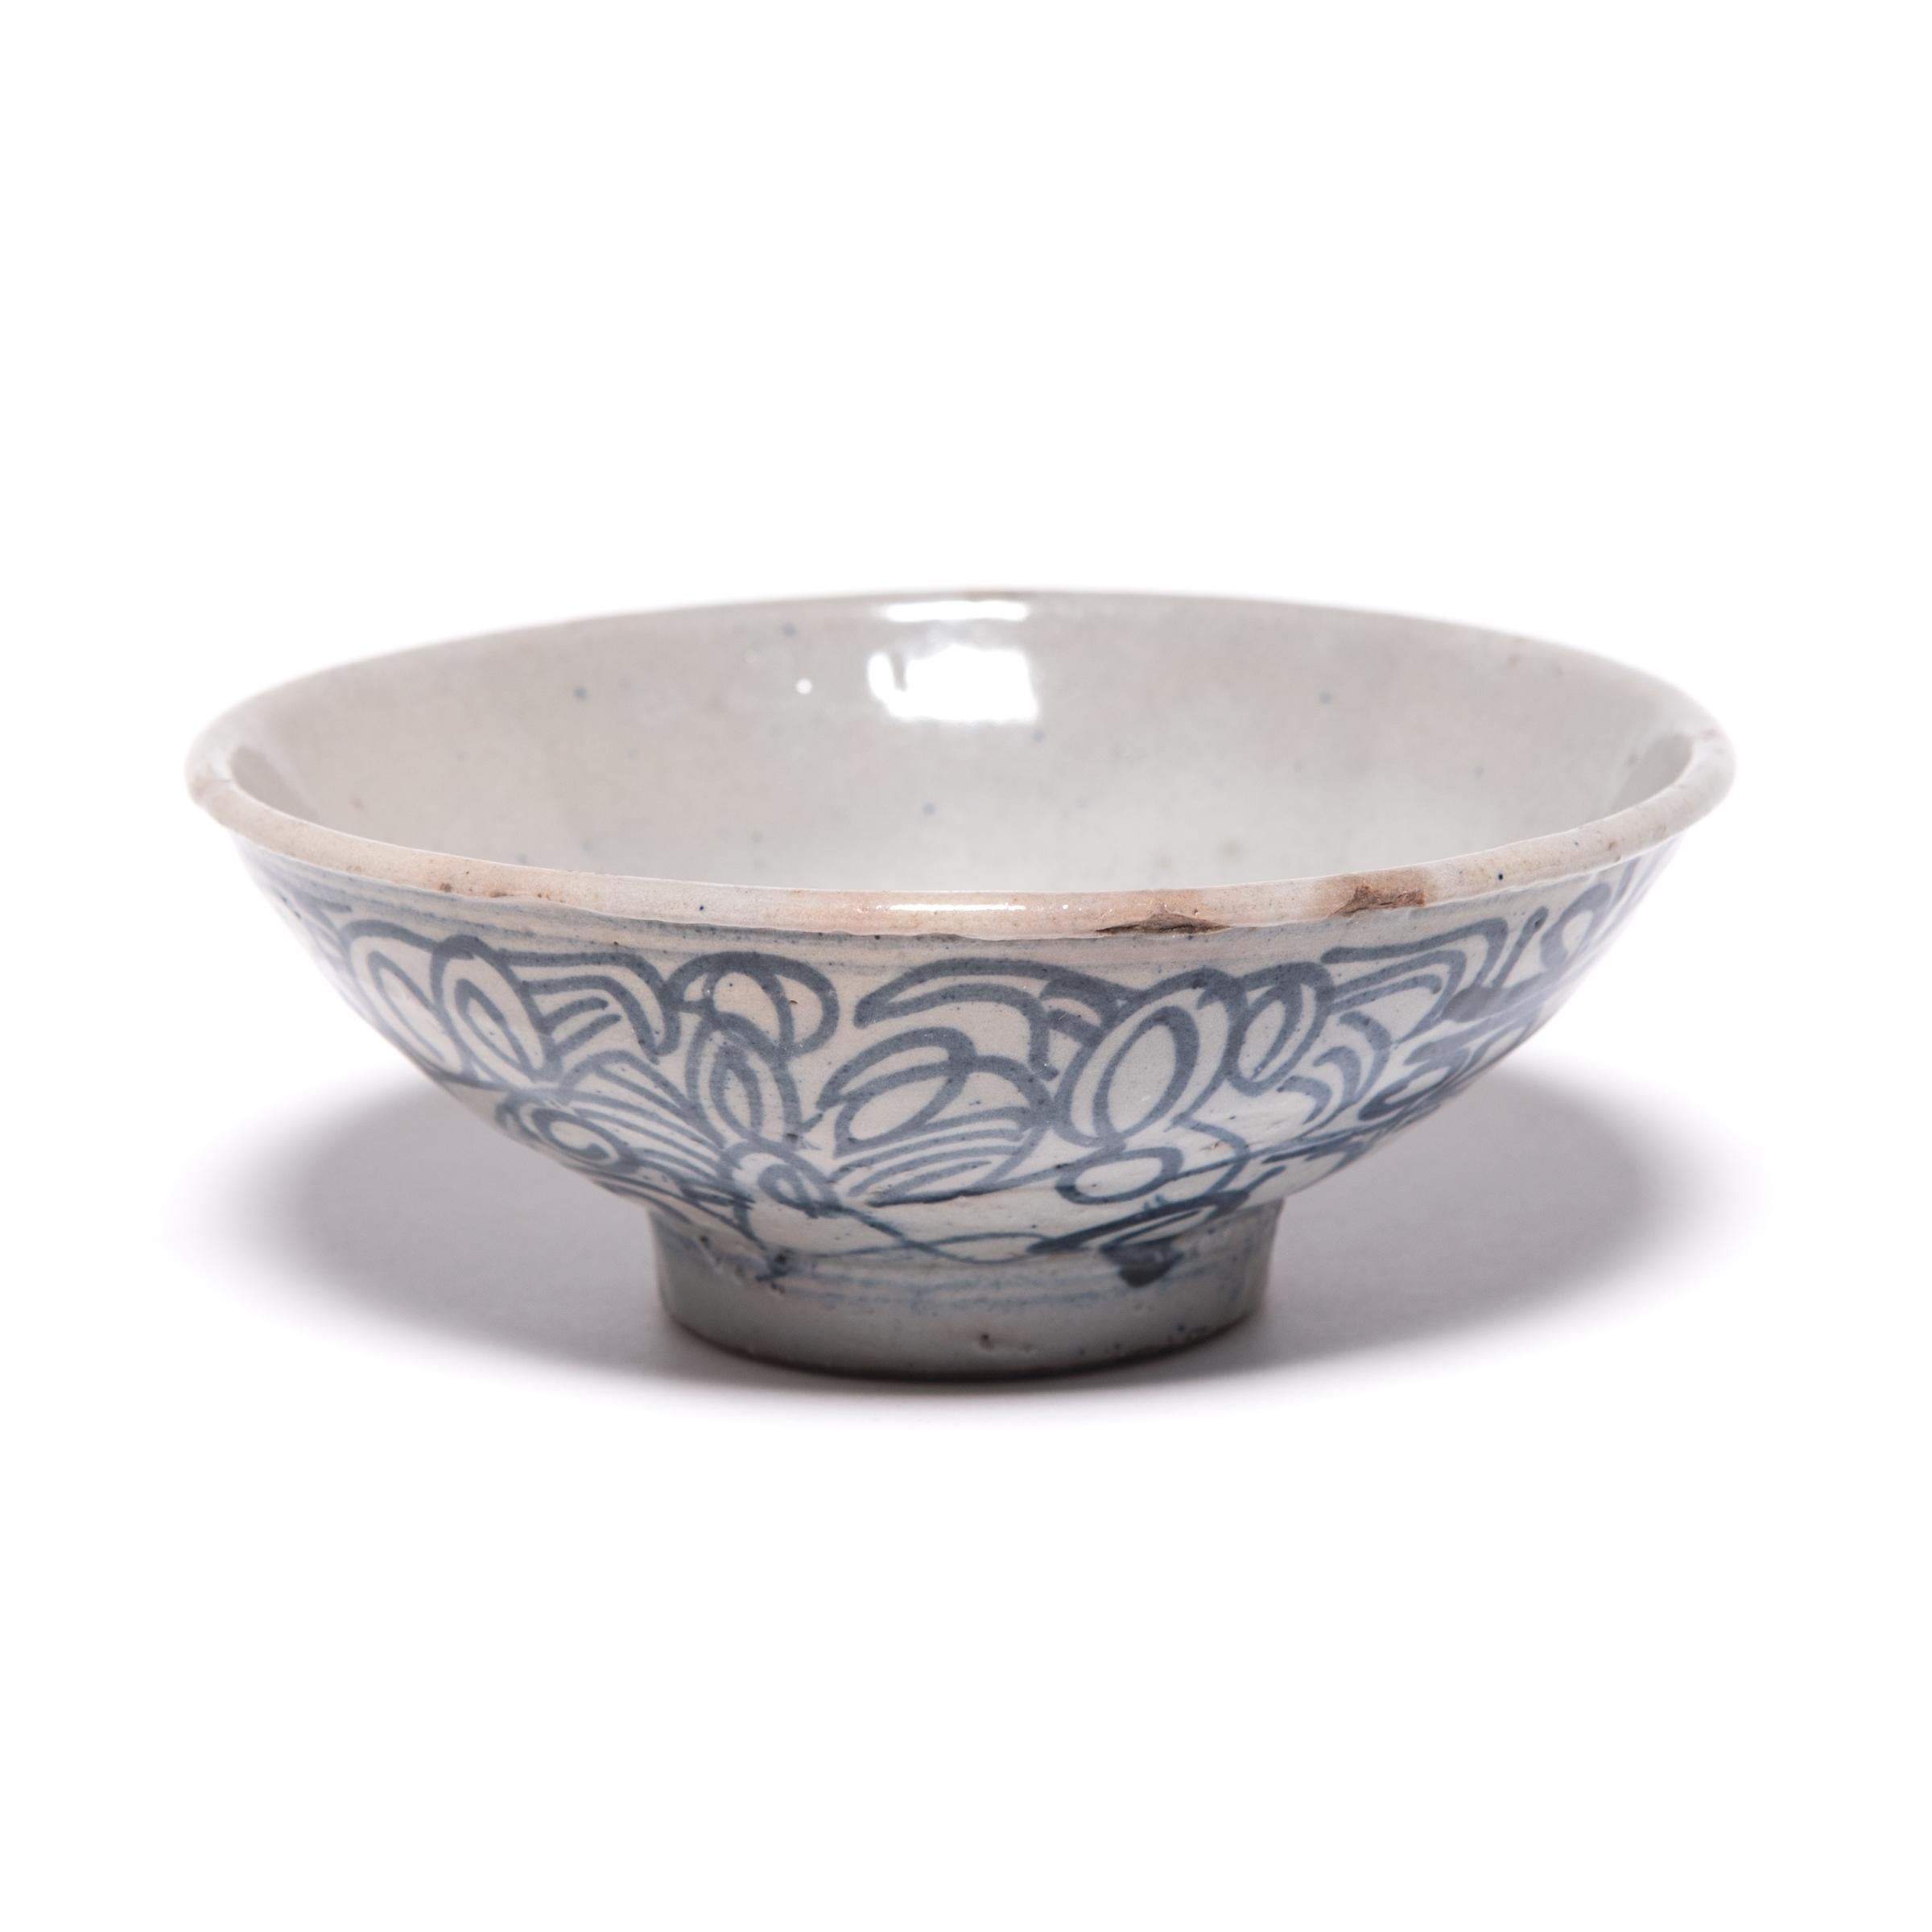 This late 19th century footed bowl would have been offered by Chinese traders traveling along the silk road in exchange for spices or gems. The Chinese artisans who hand painted it with scrolls, loops, and crossed lines thought the meandering